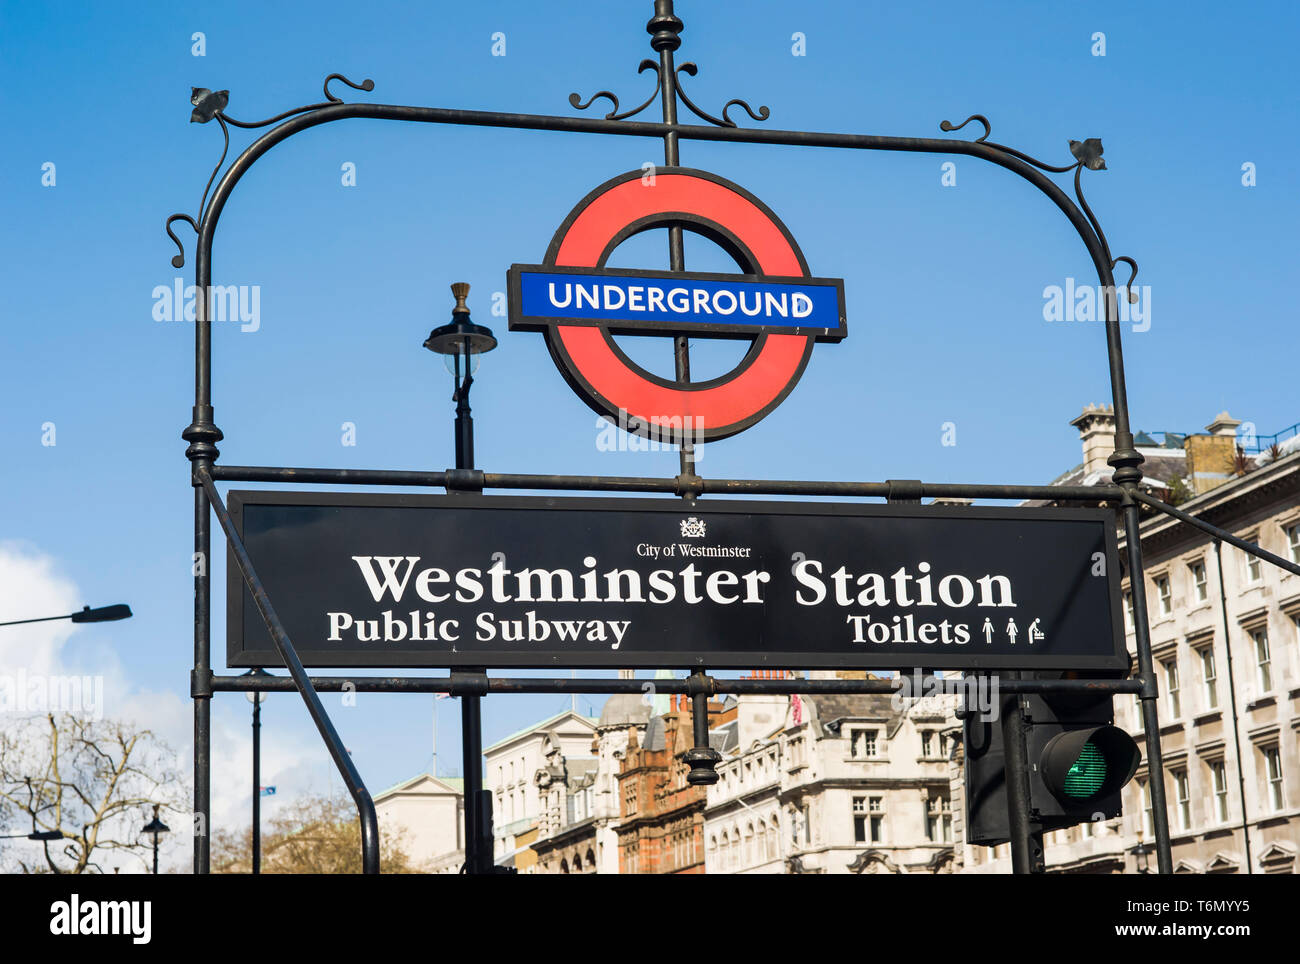 The London Underground sign for Westminster Station in London, England. Stock Photo